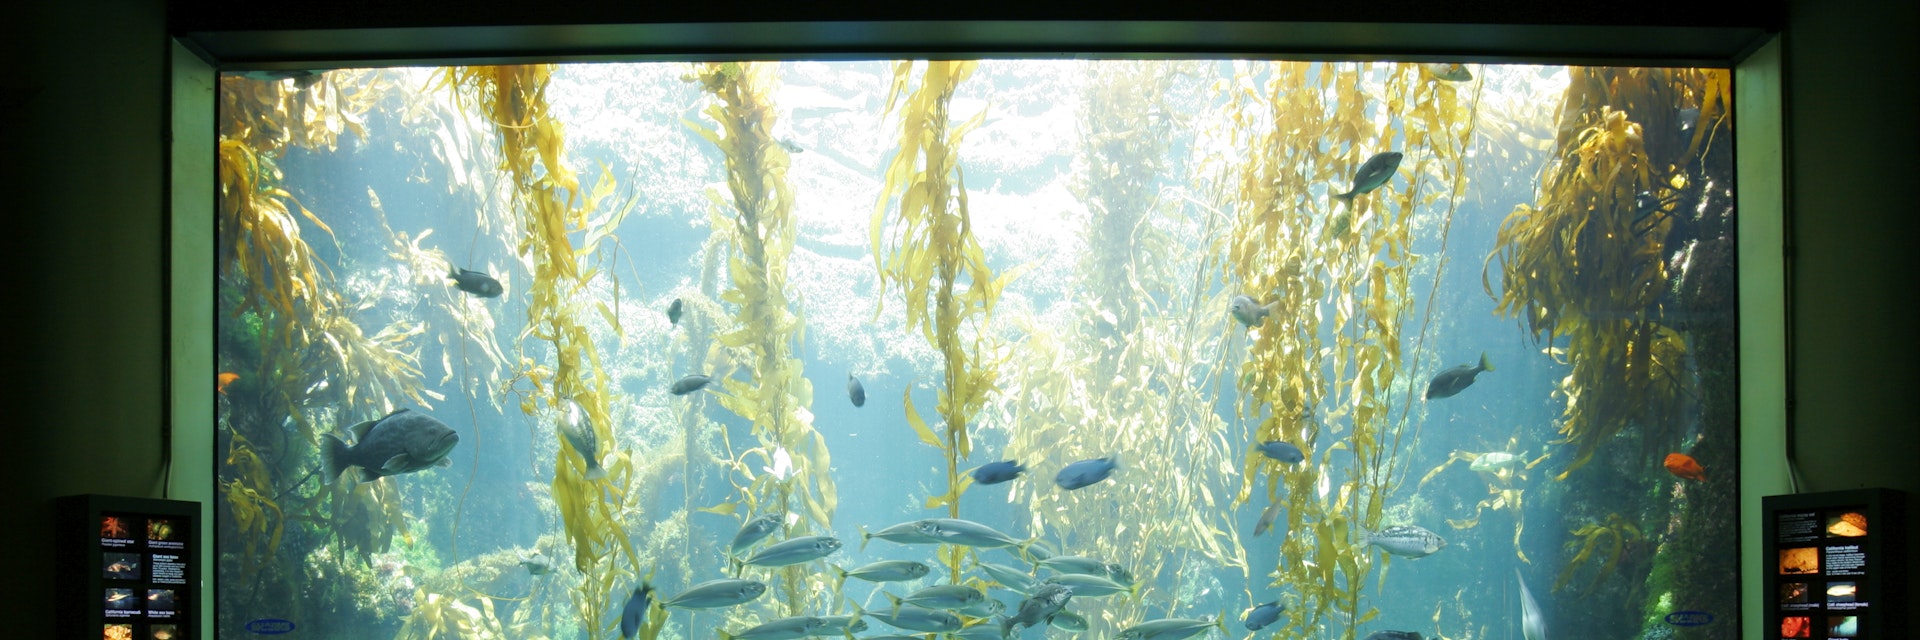 Birch Aquarium At Scripps, La Jolla, California. (Photo by: Education Images/Citizens of the Planet/Universal Images Group via Getty Images)